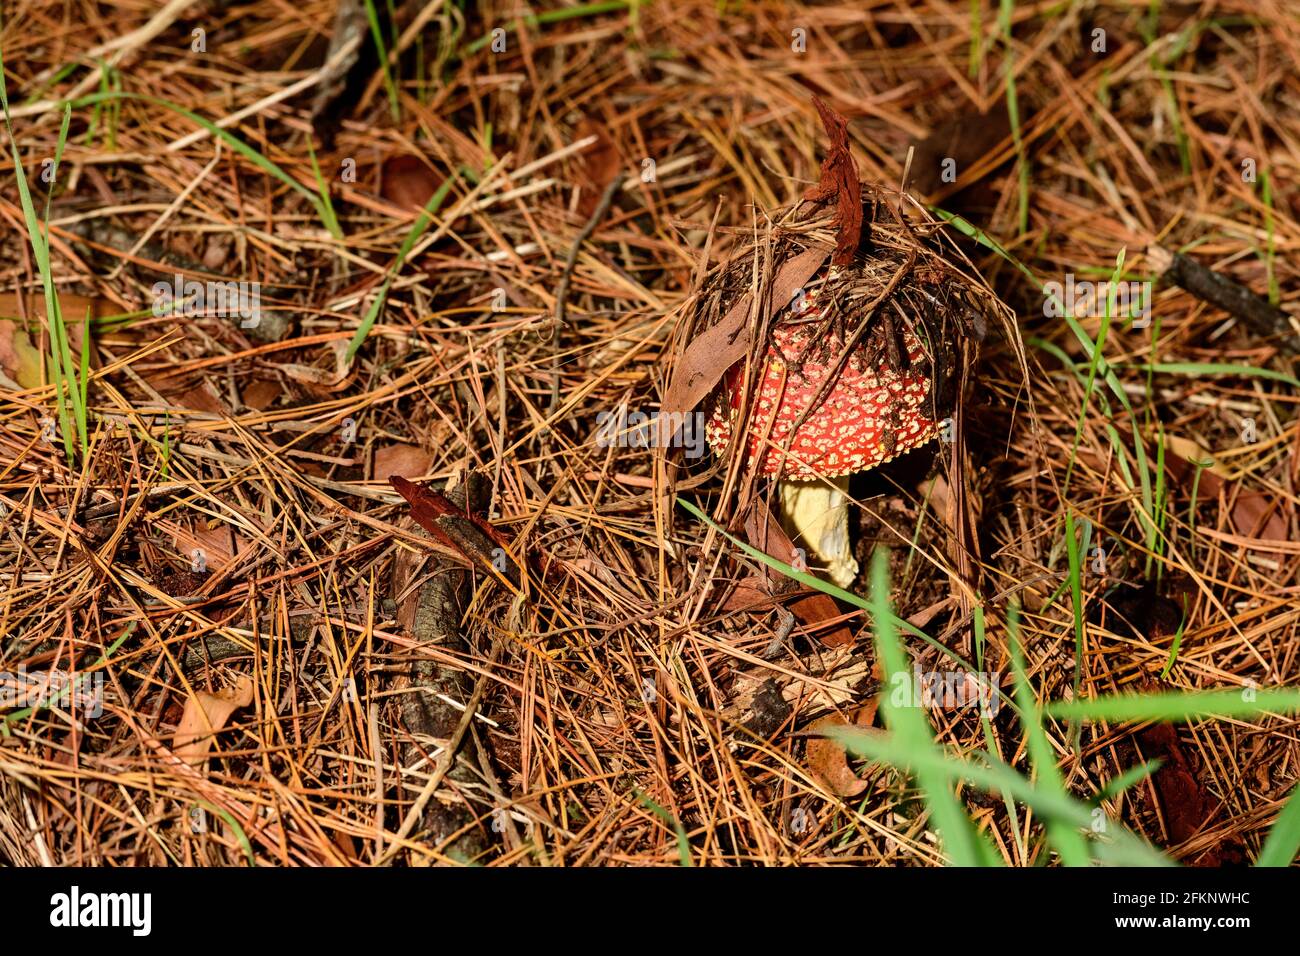 Autumn and a Fly agaric  Toadstool bursts through the pine needles Stock Photo